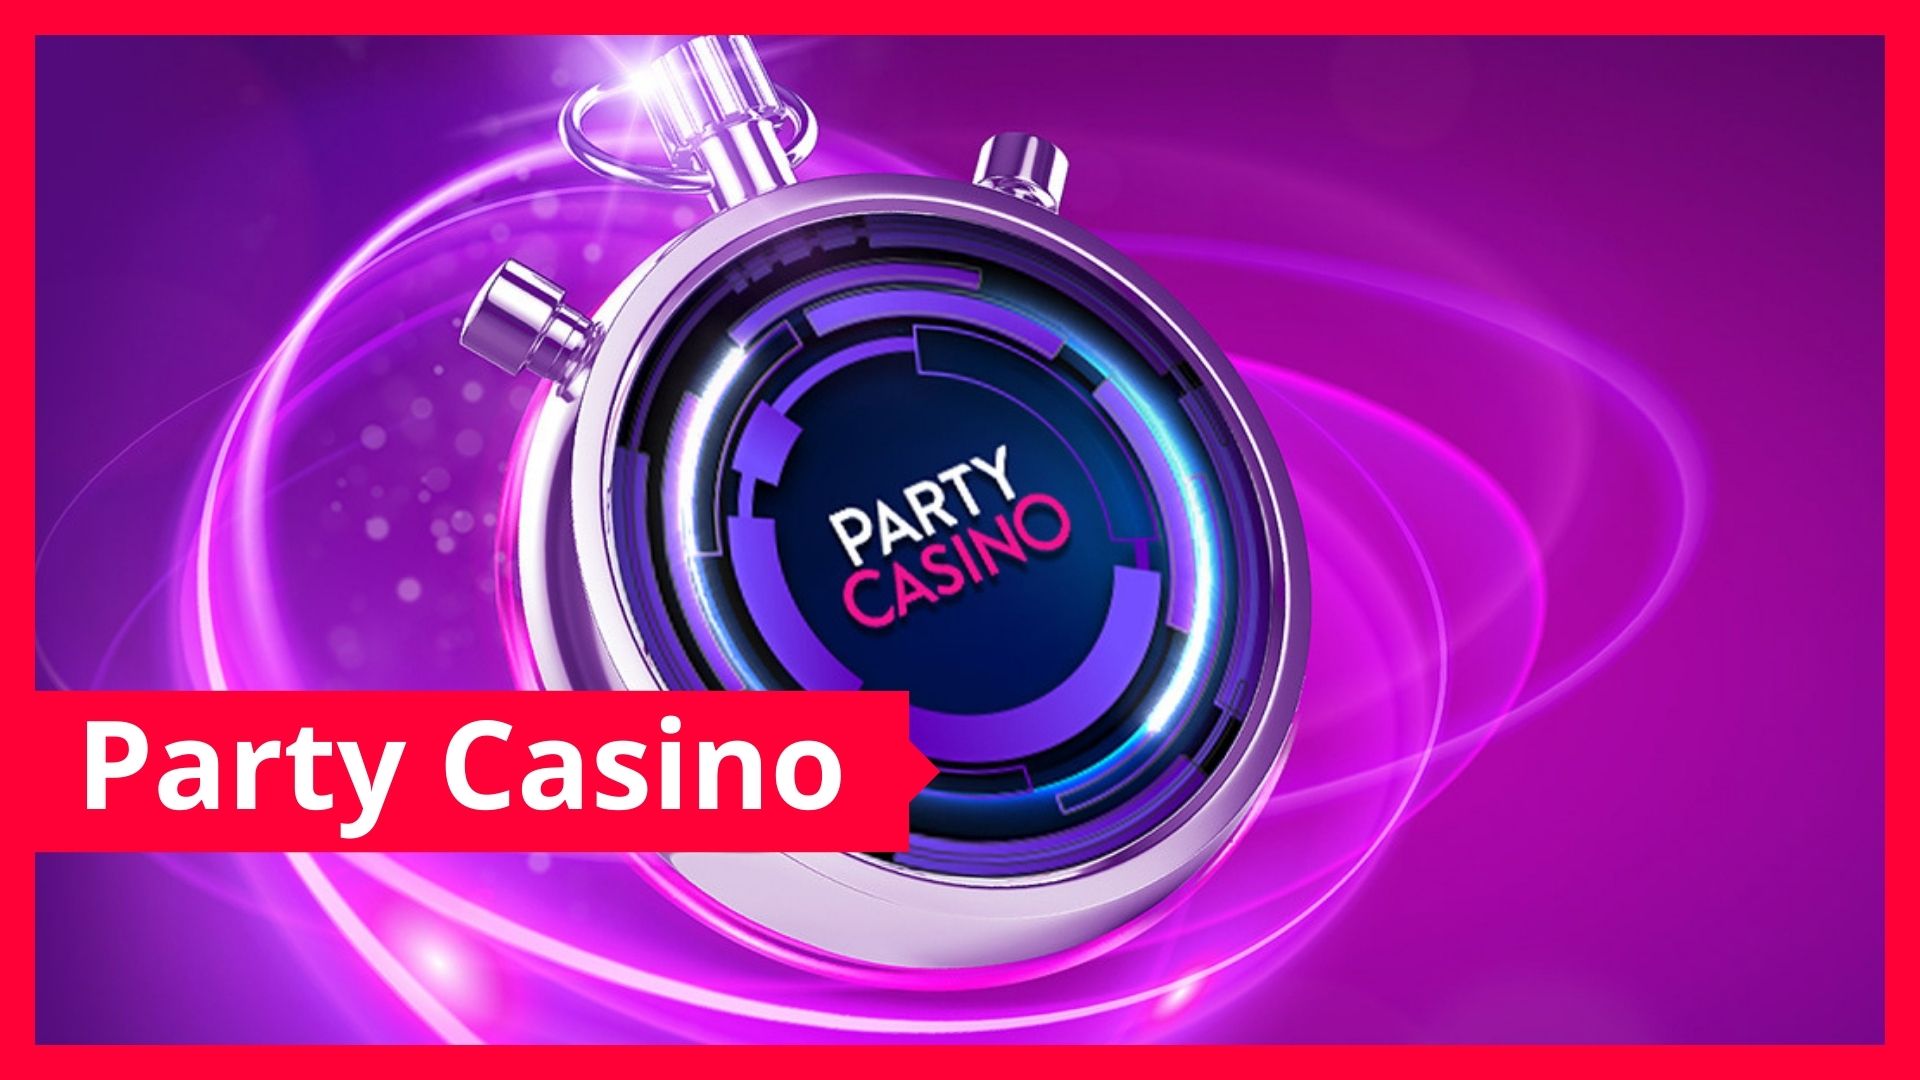 PartyCasino Review